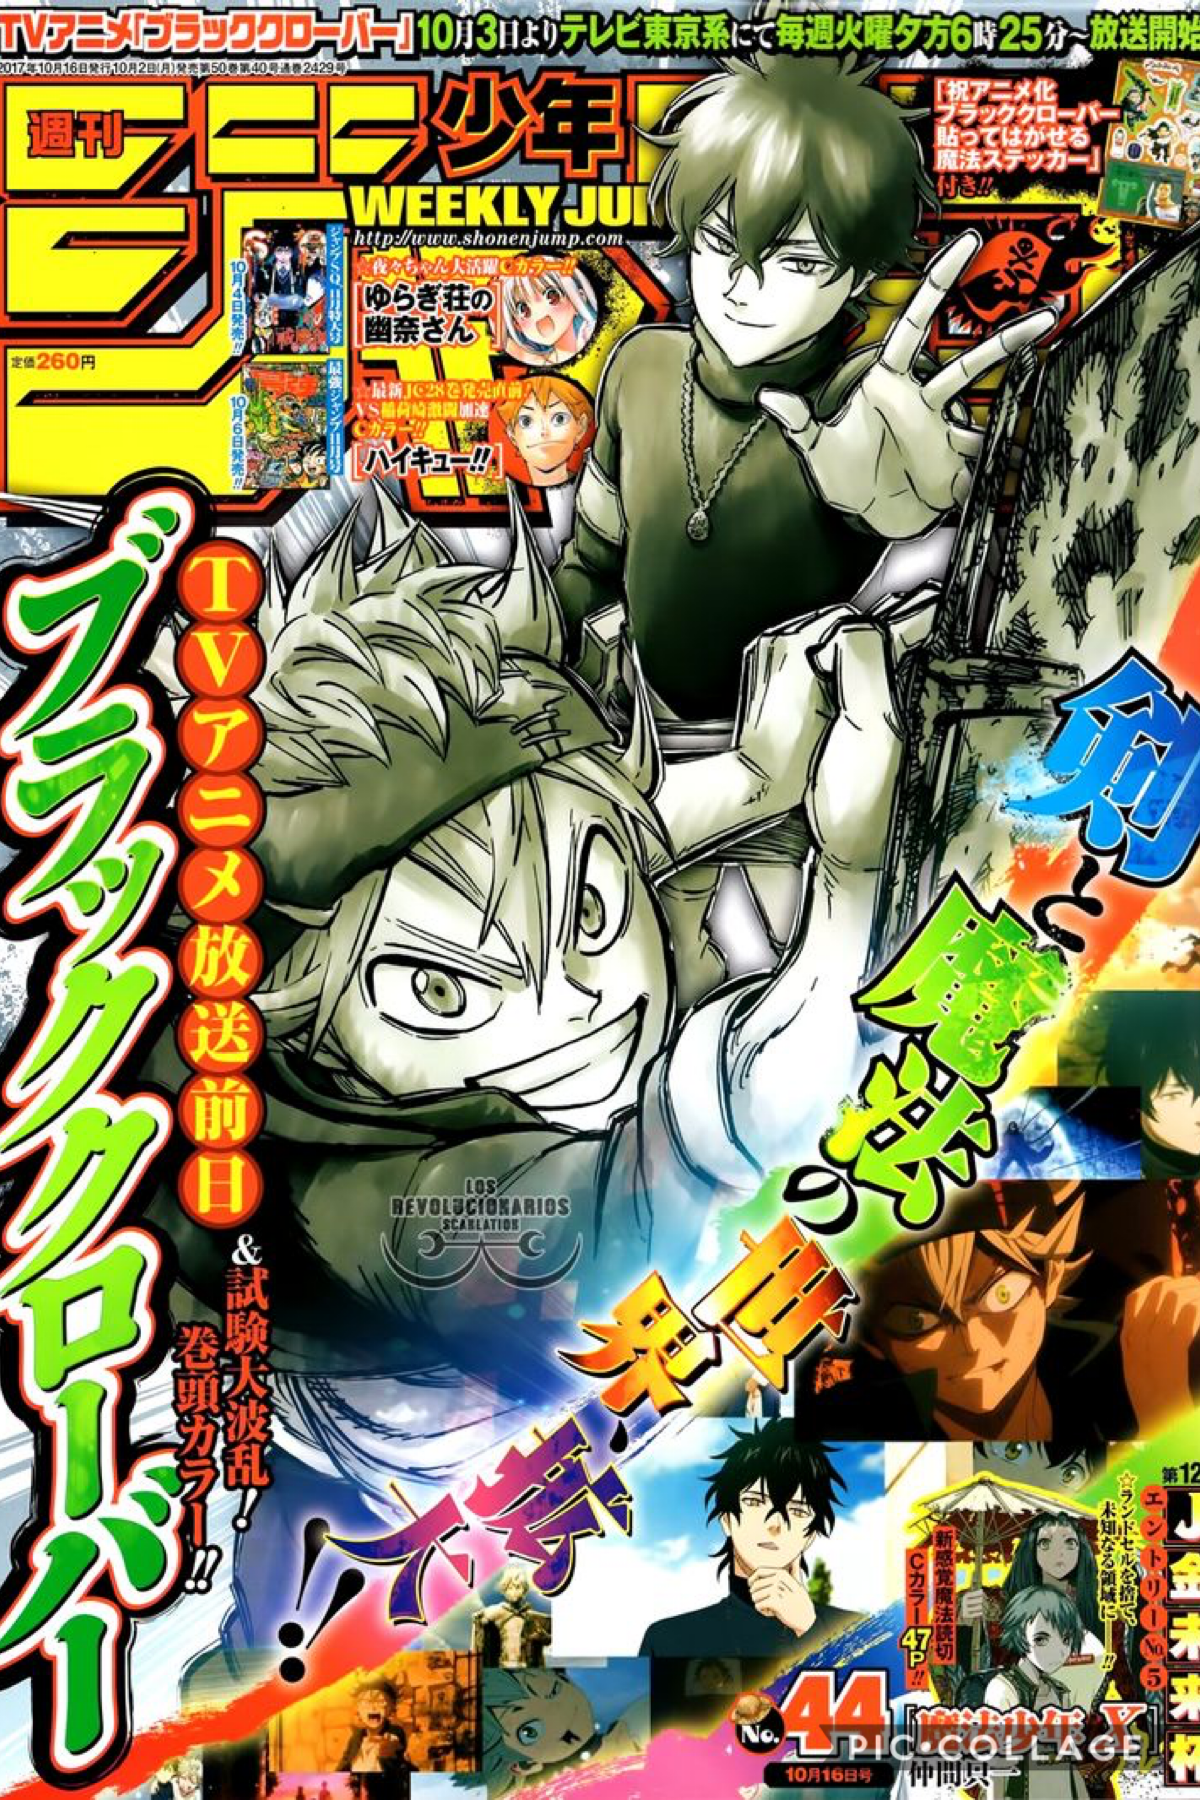 More Black Clover Content Coming Soon!